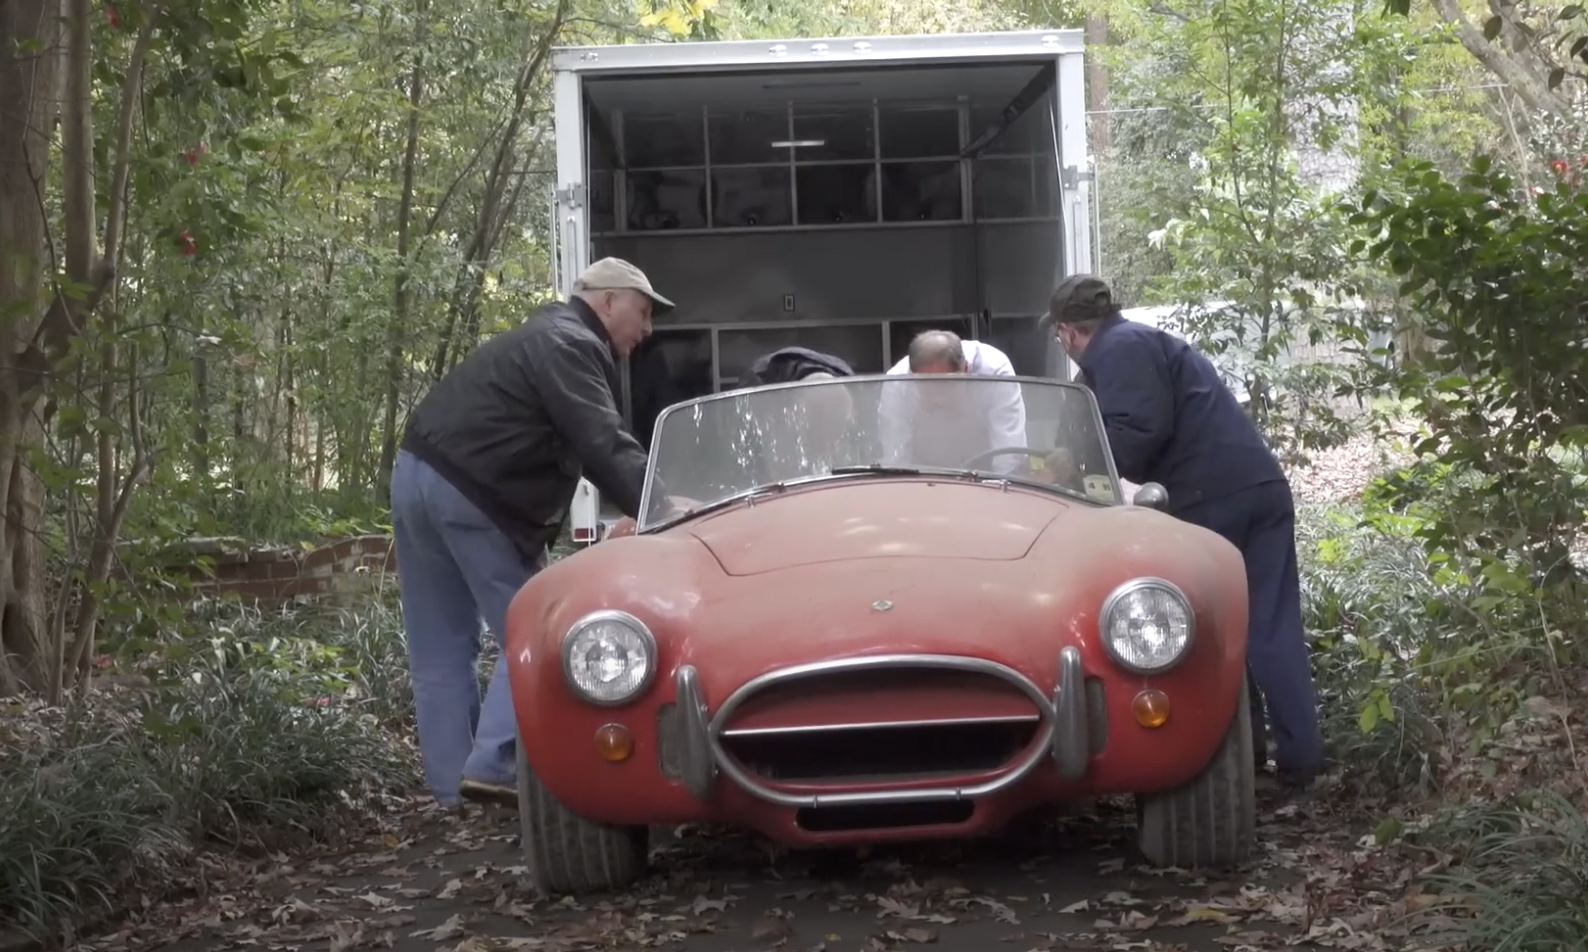 Watch: Rare 427 Cobra and Ferrari 275 Extracted from Condemned Garage